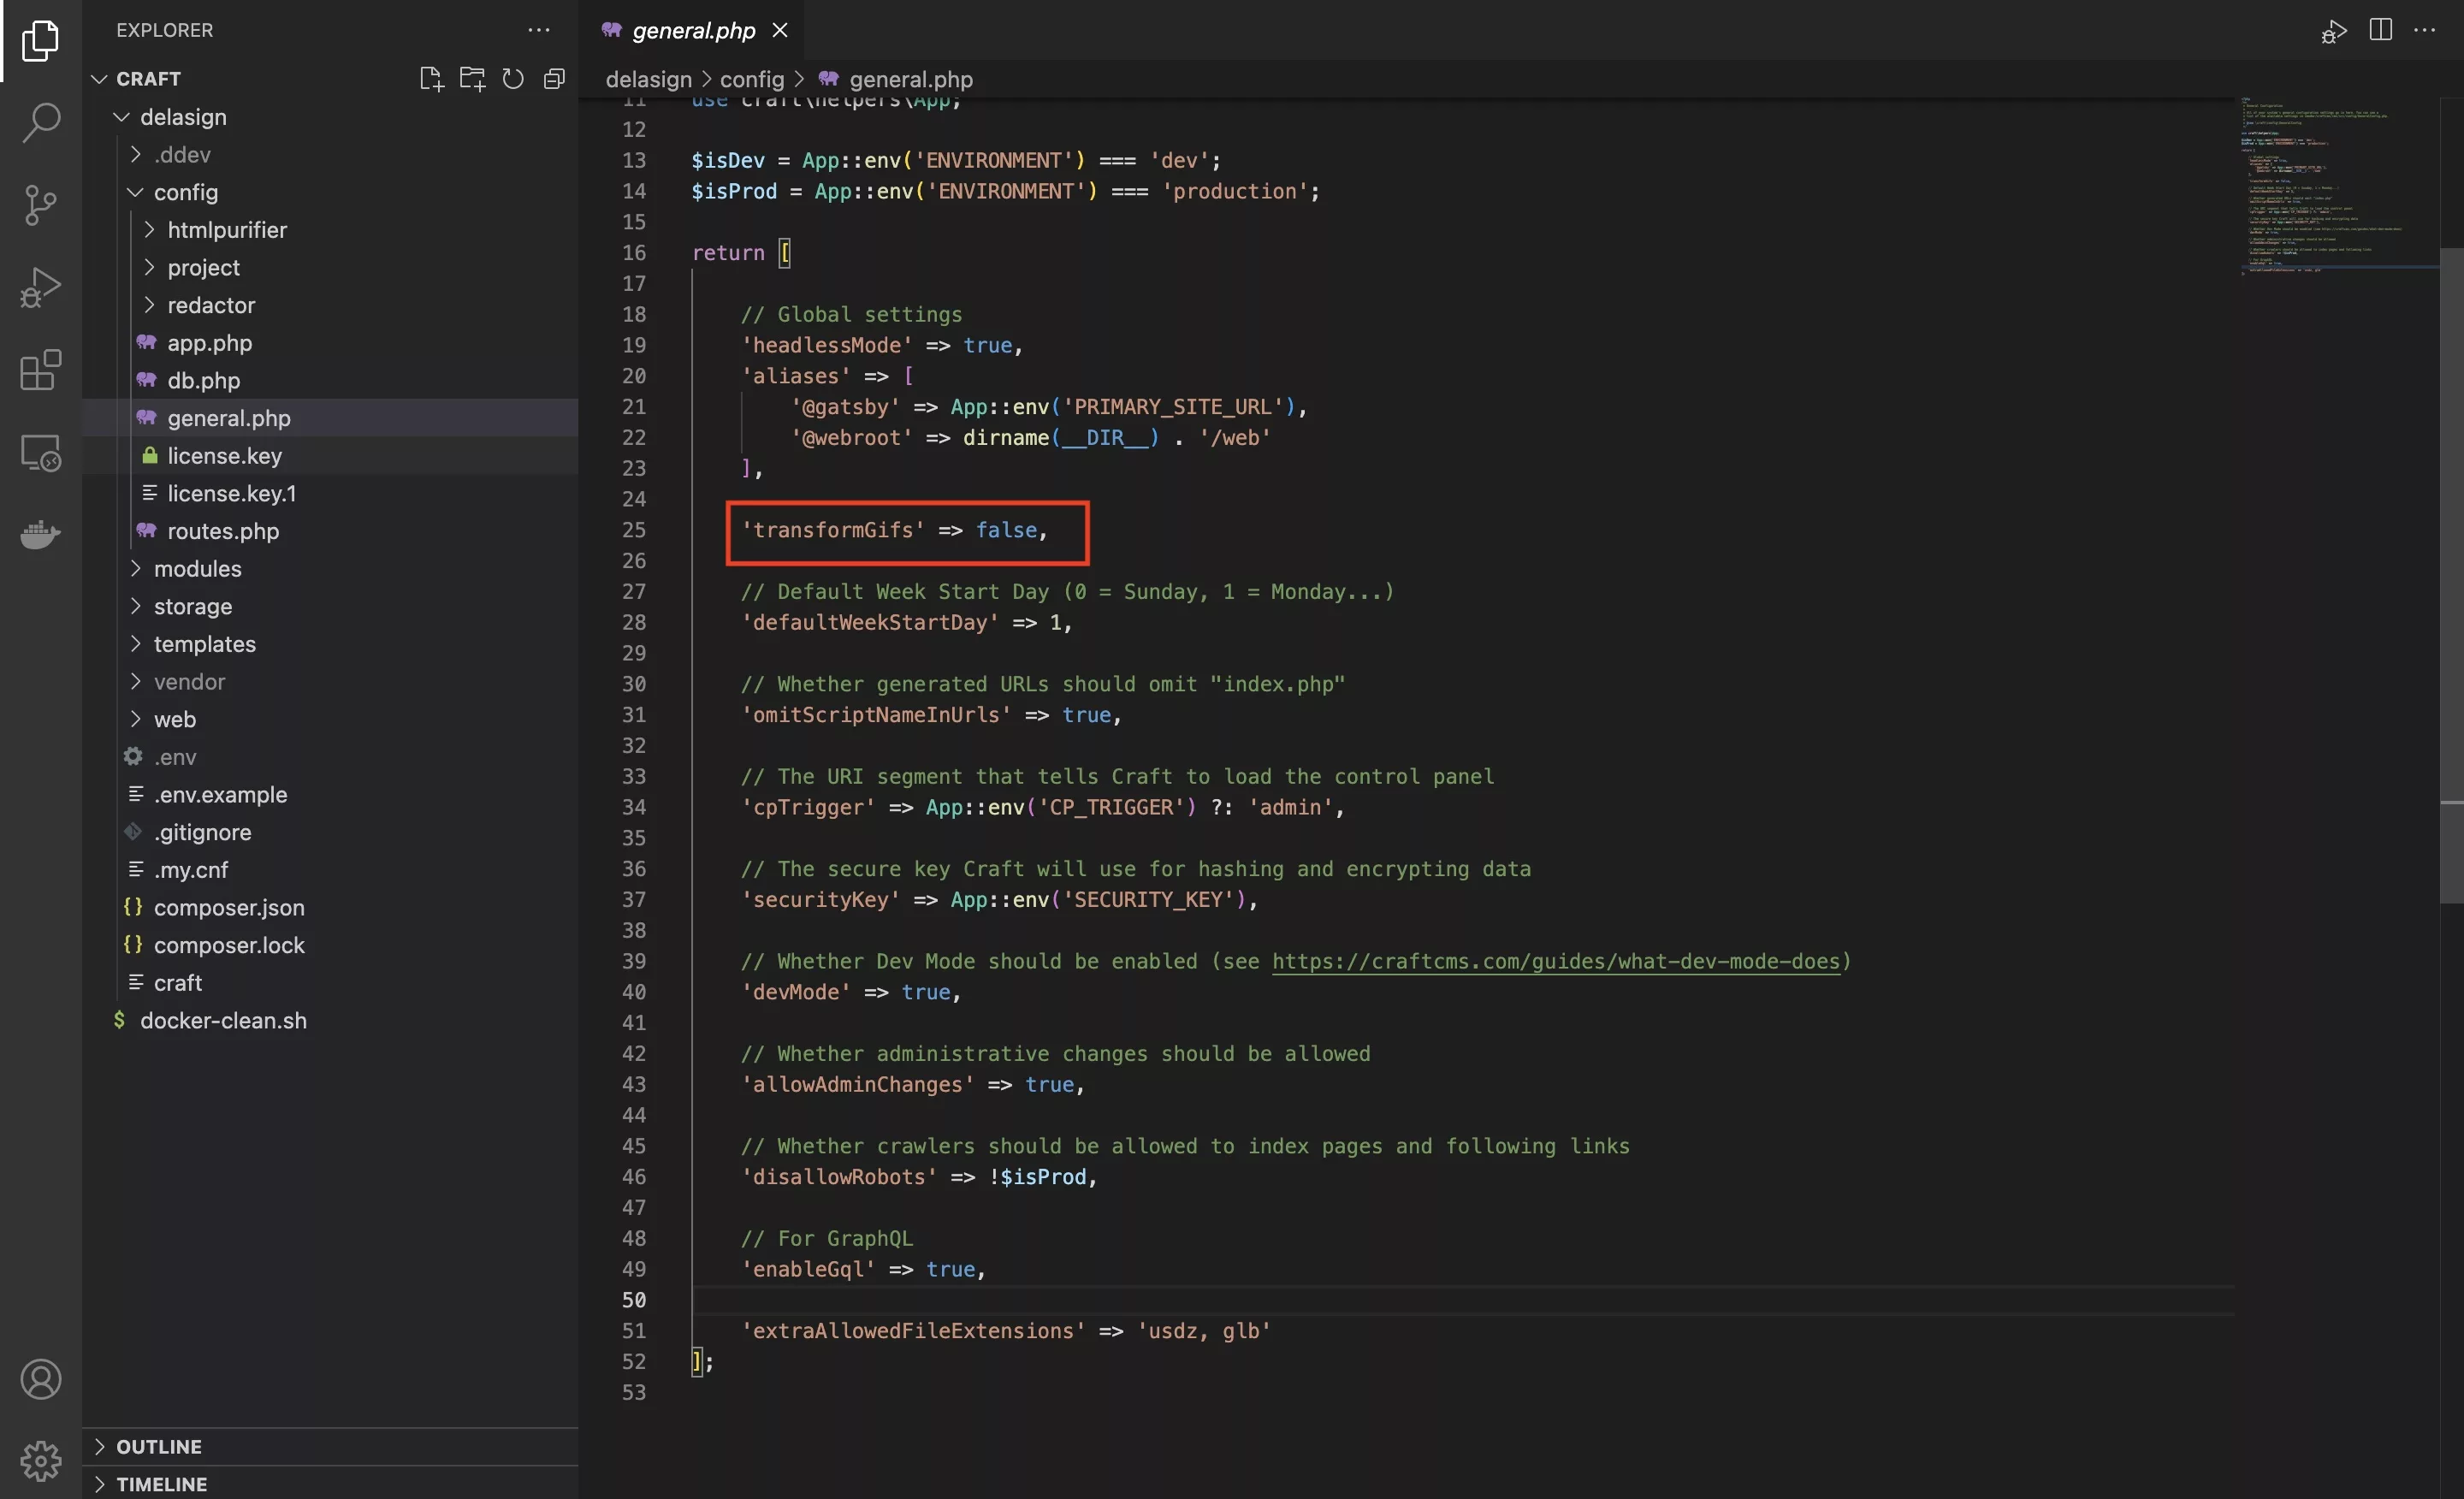 A screenshot of VSCode showing how to apply transform gifs in the general.php file.